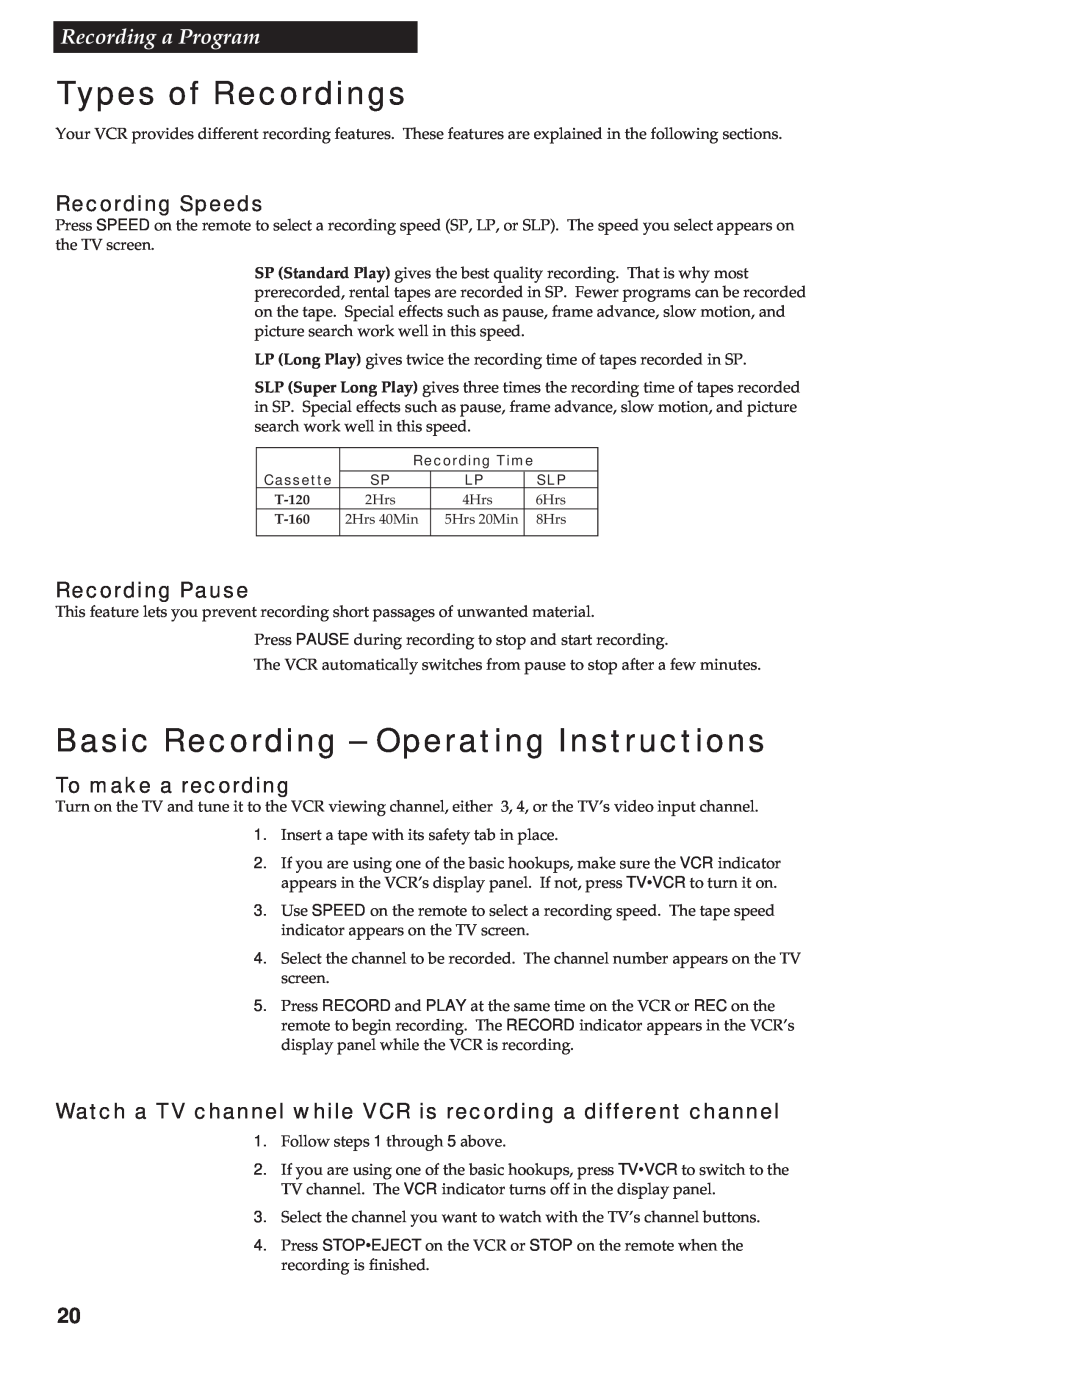 RCA VR602HF manual Types of Recordings, Basic Recording - Operating Instructions, Recording a Program, Recording Speeds 